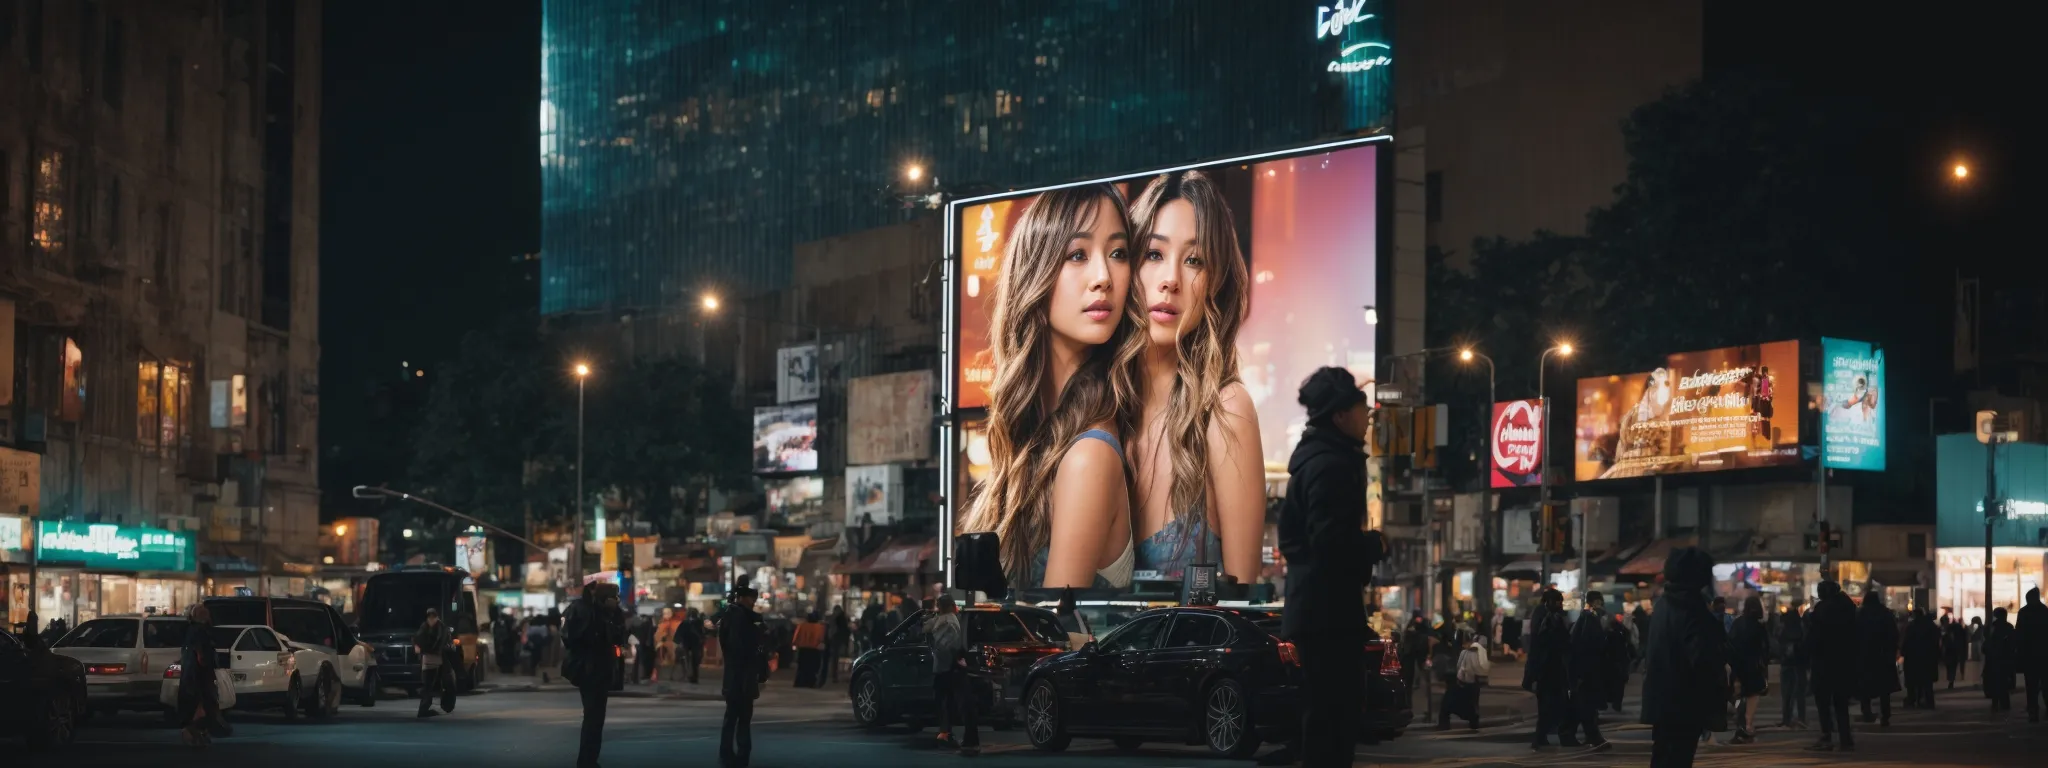 a brightly lit billboard on a bustling city street corner, towering above pedestrians and attracting their gaze.